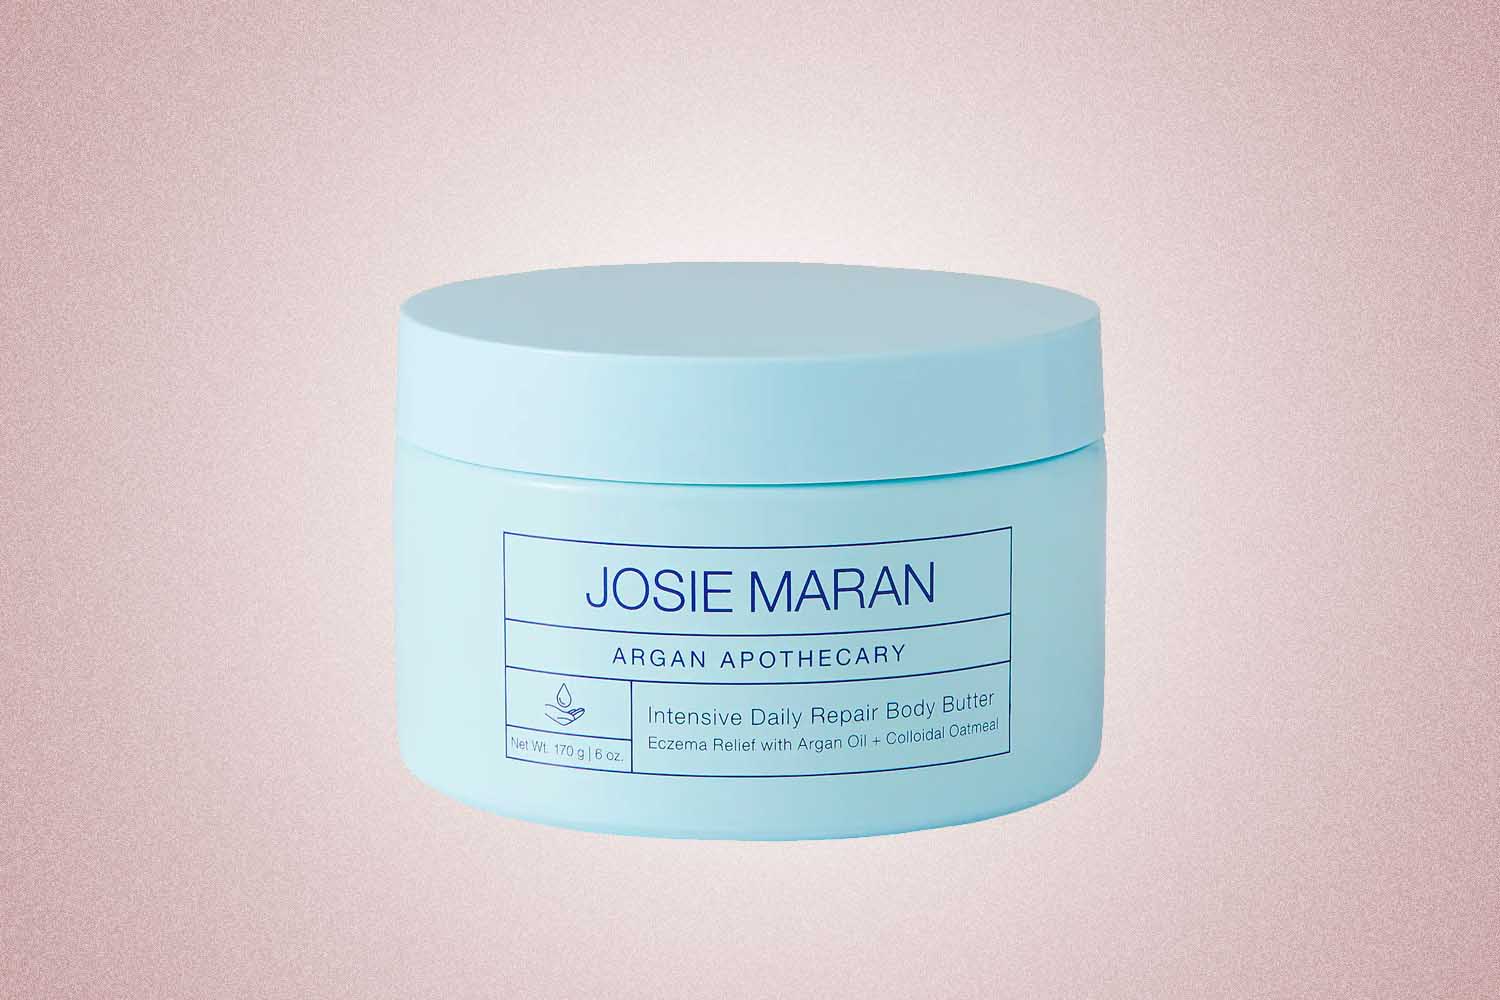 A light blue jar of body butter from Josie Maran, a perfect Valentine’s Day gift for 2022, on a pink background.